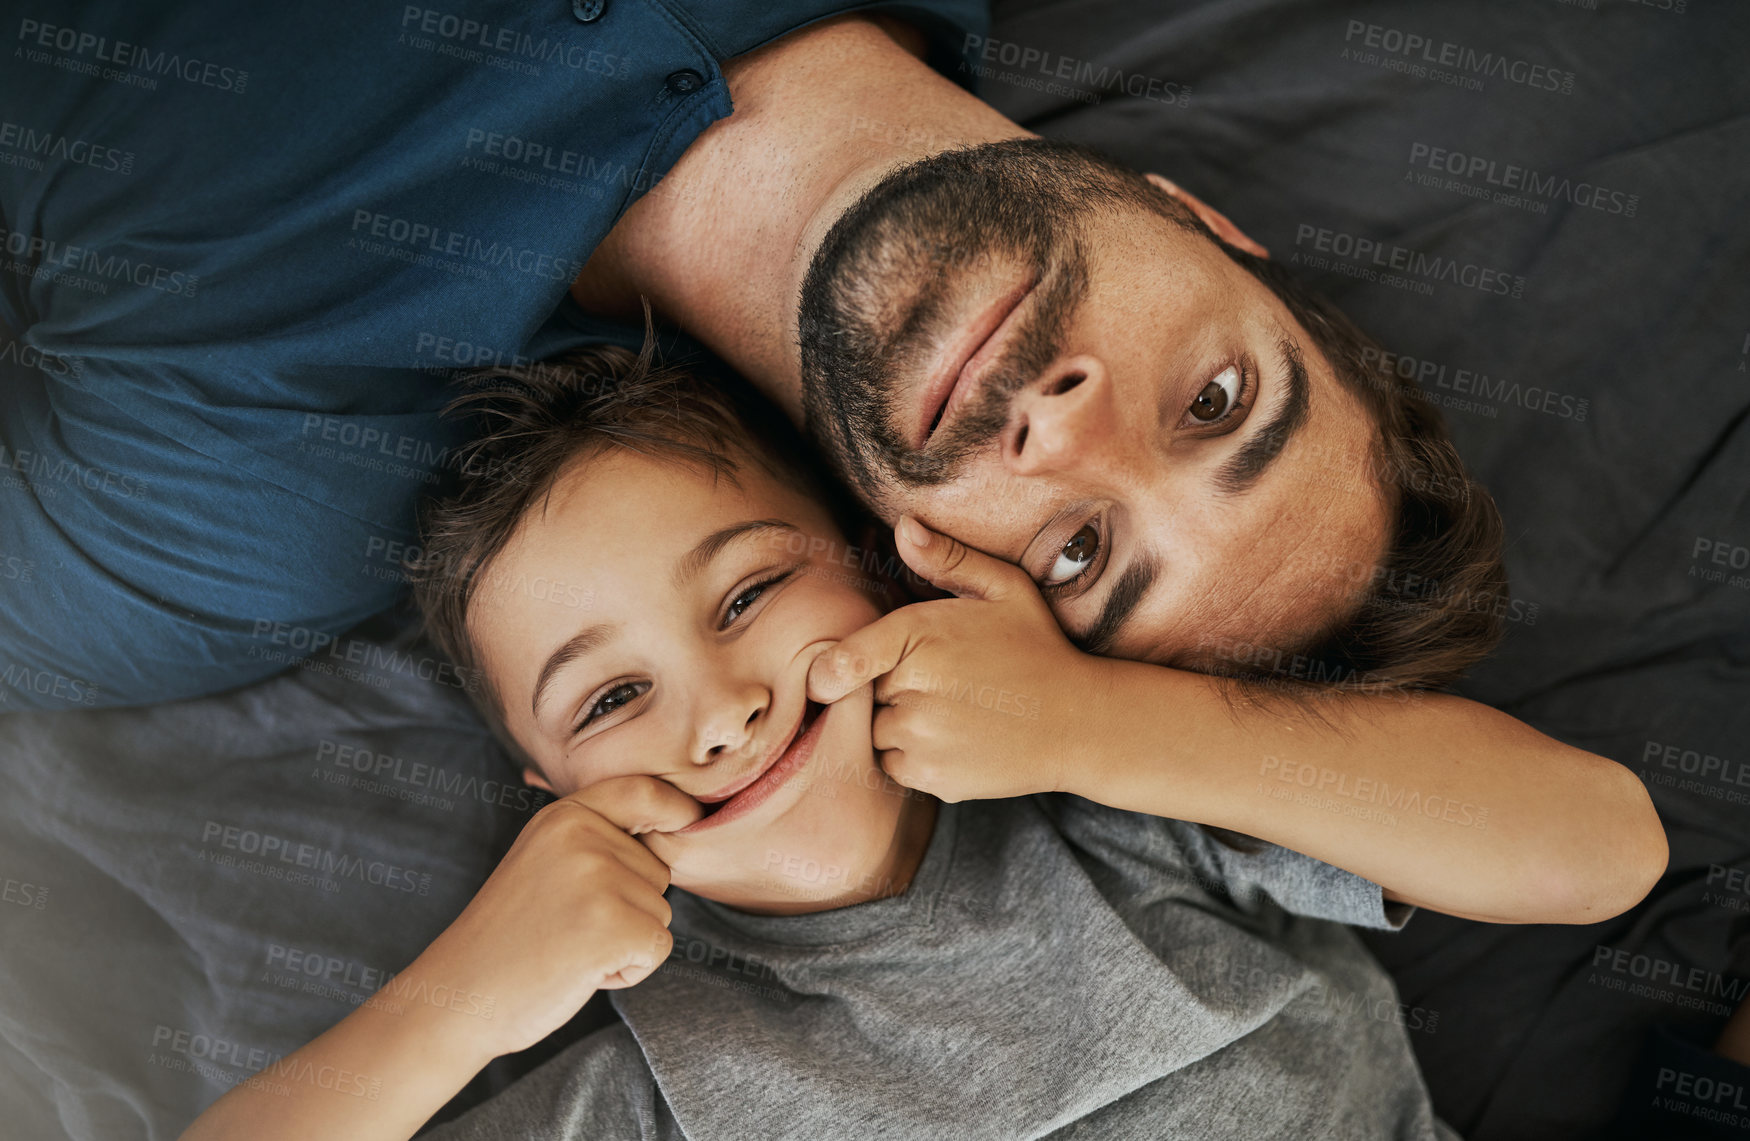 Buy stock photo Shot of a young boy and his father spending some quality time at home